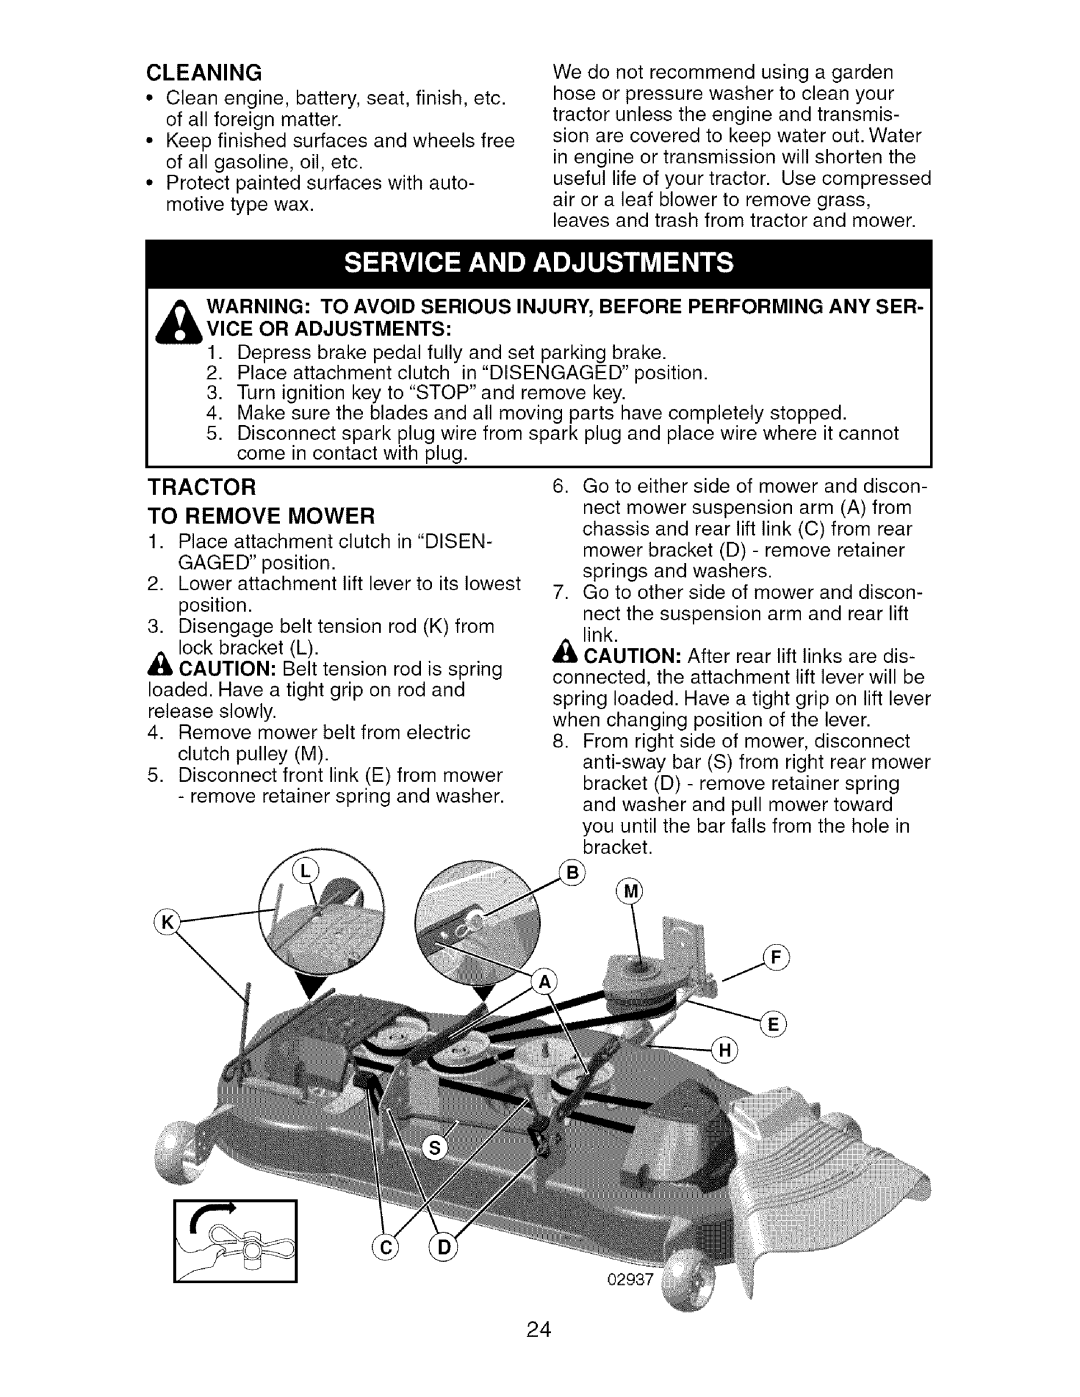 Craftsman 917.276920 manual Cleaning, To Remove Mower 